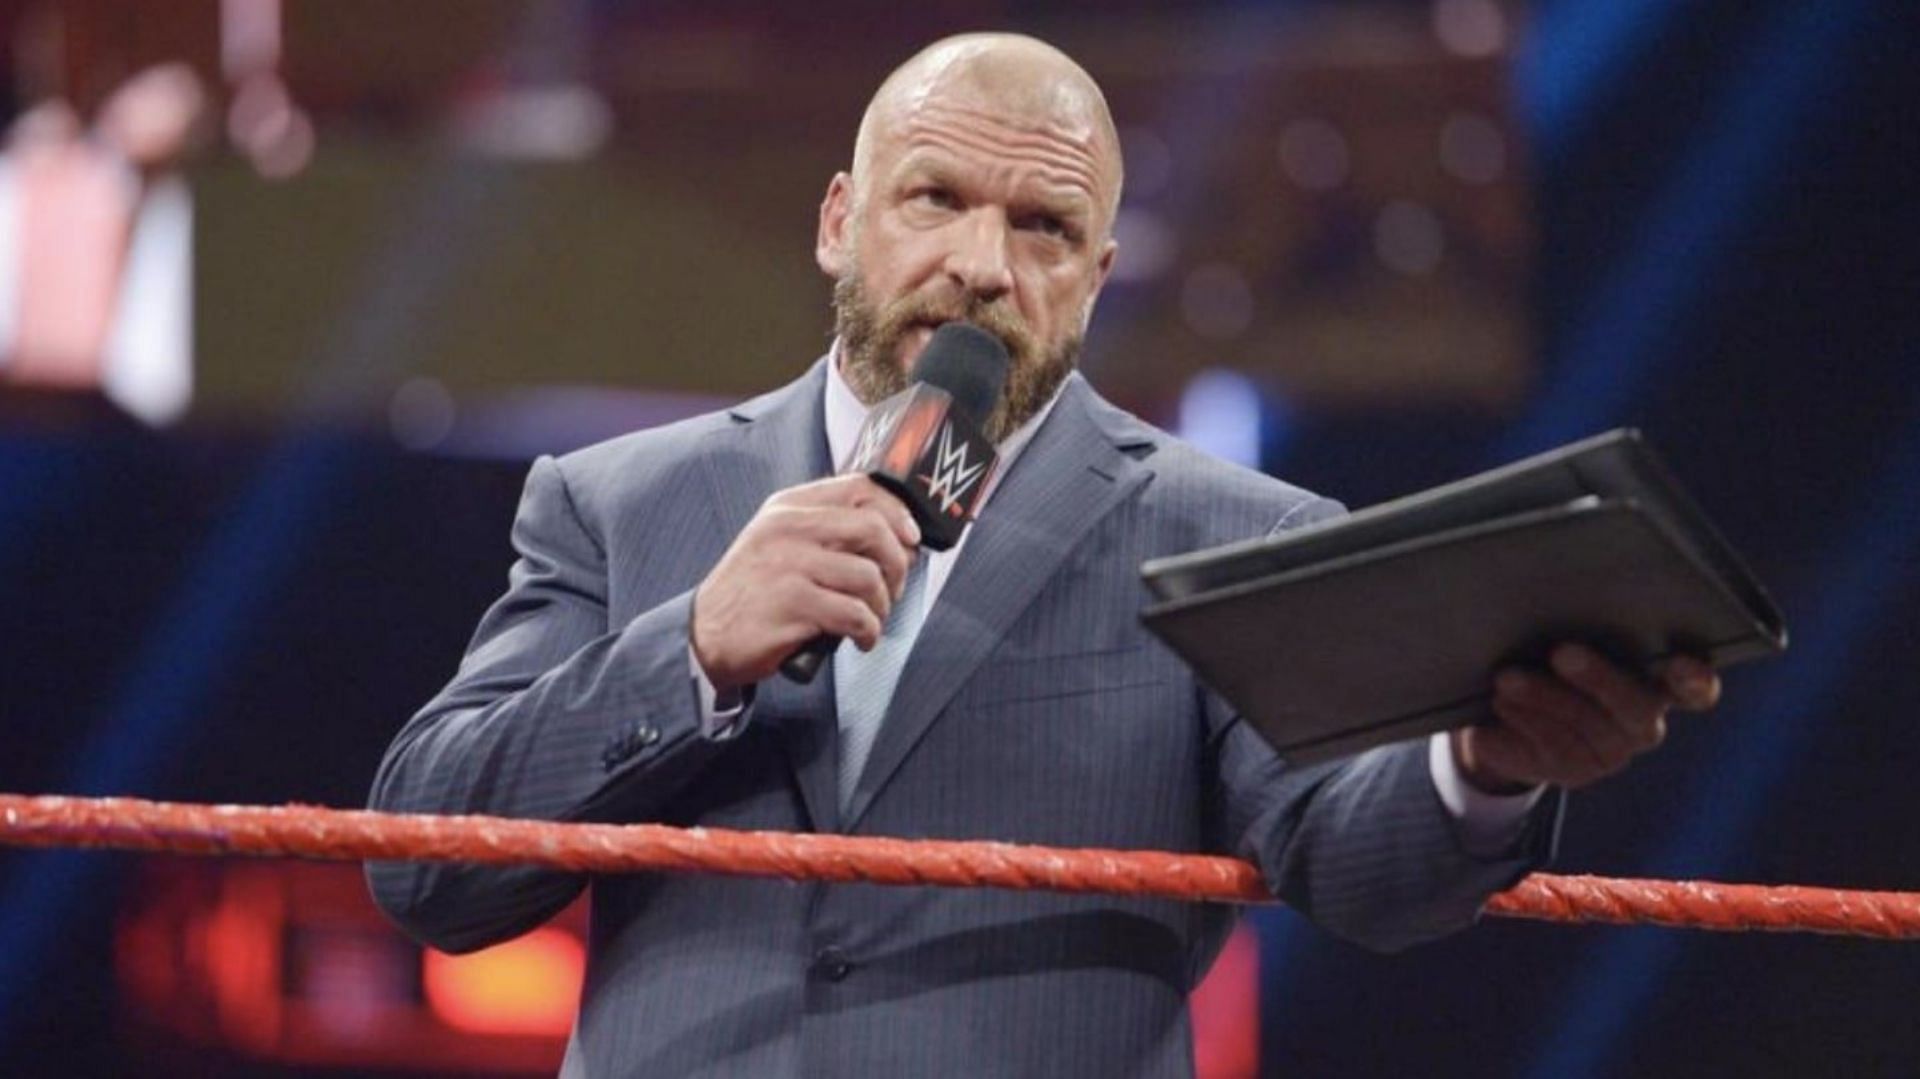 Triple H has replaced Vince McMahon as WWE